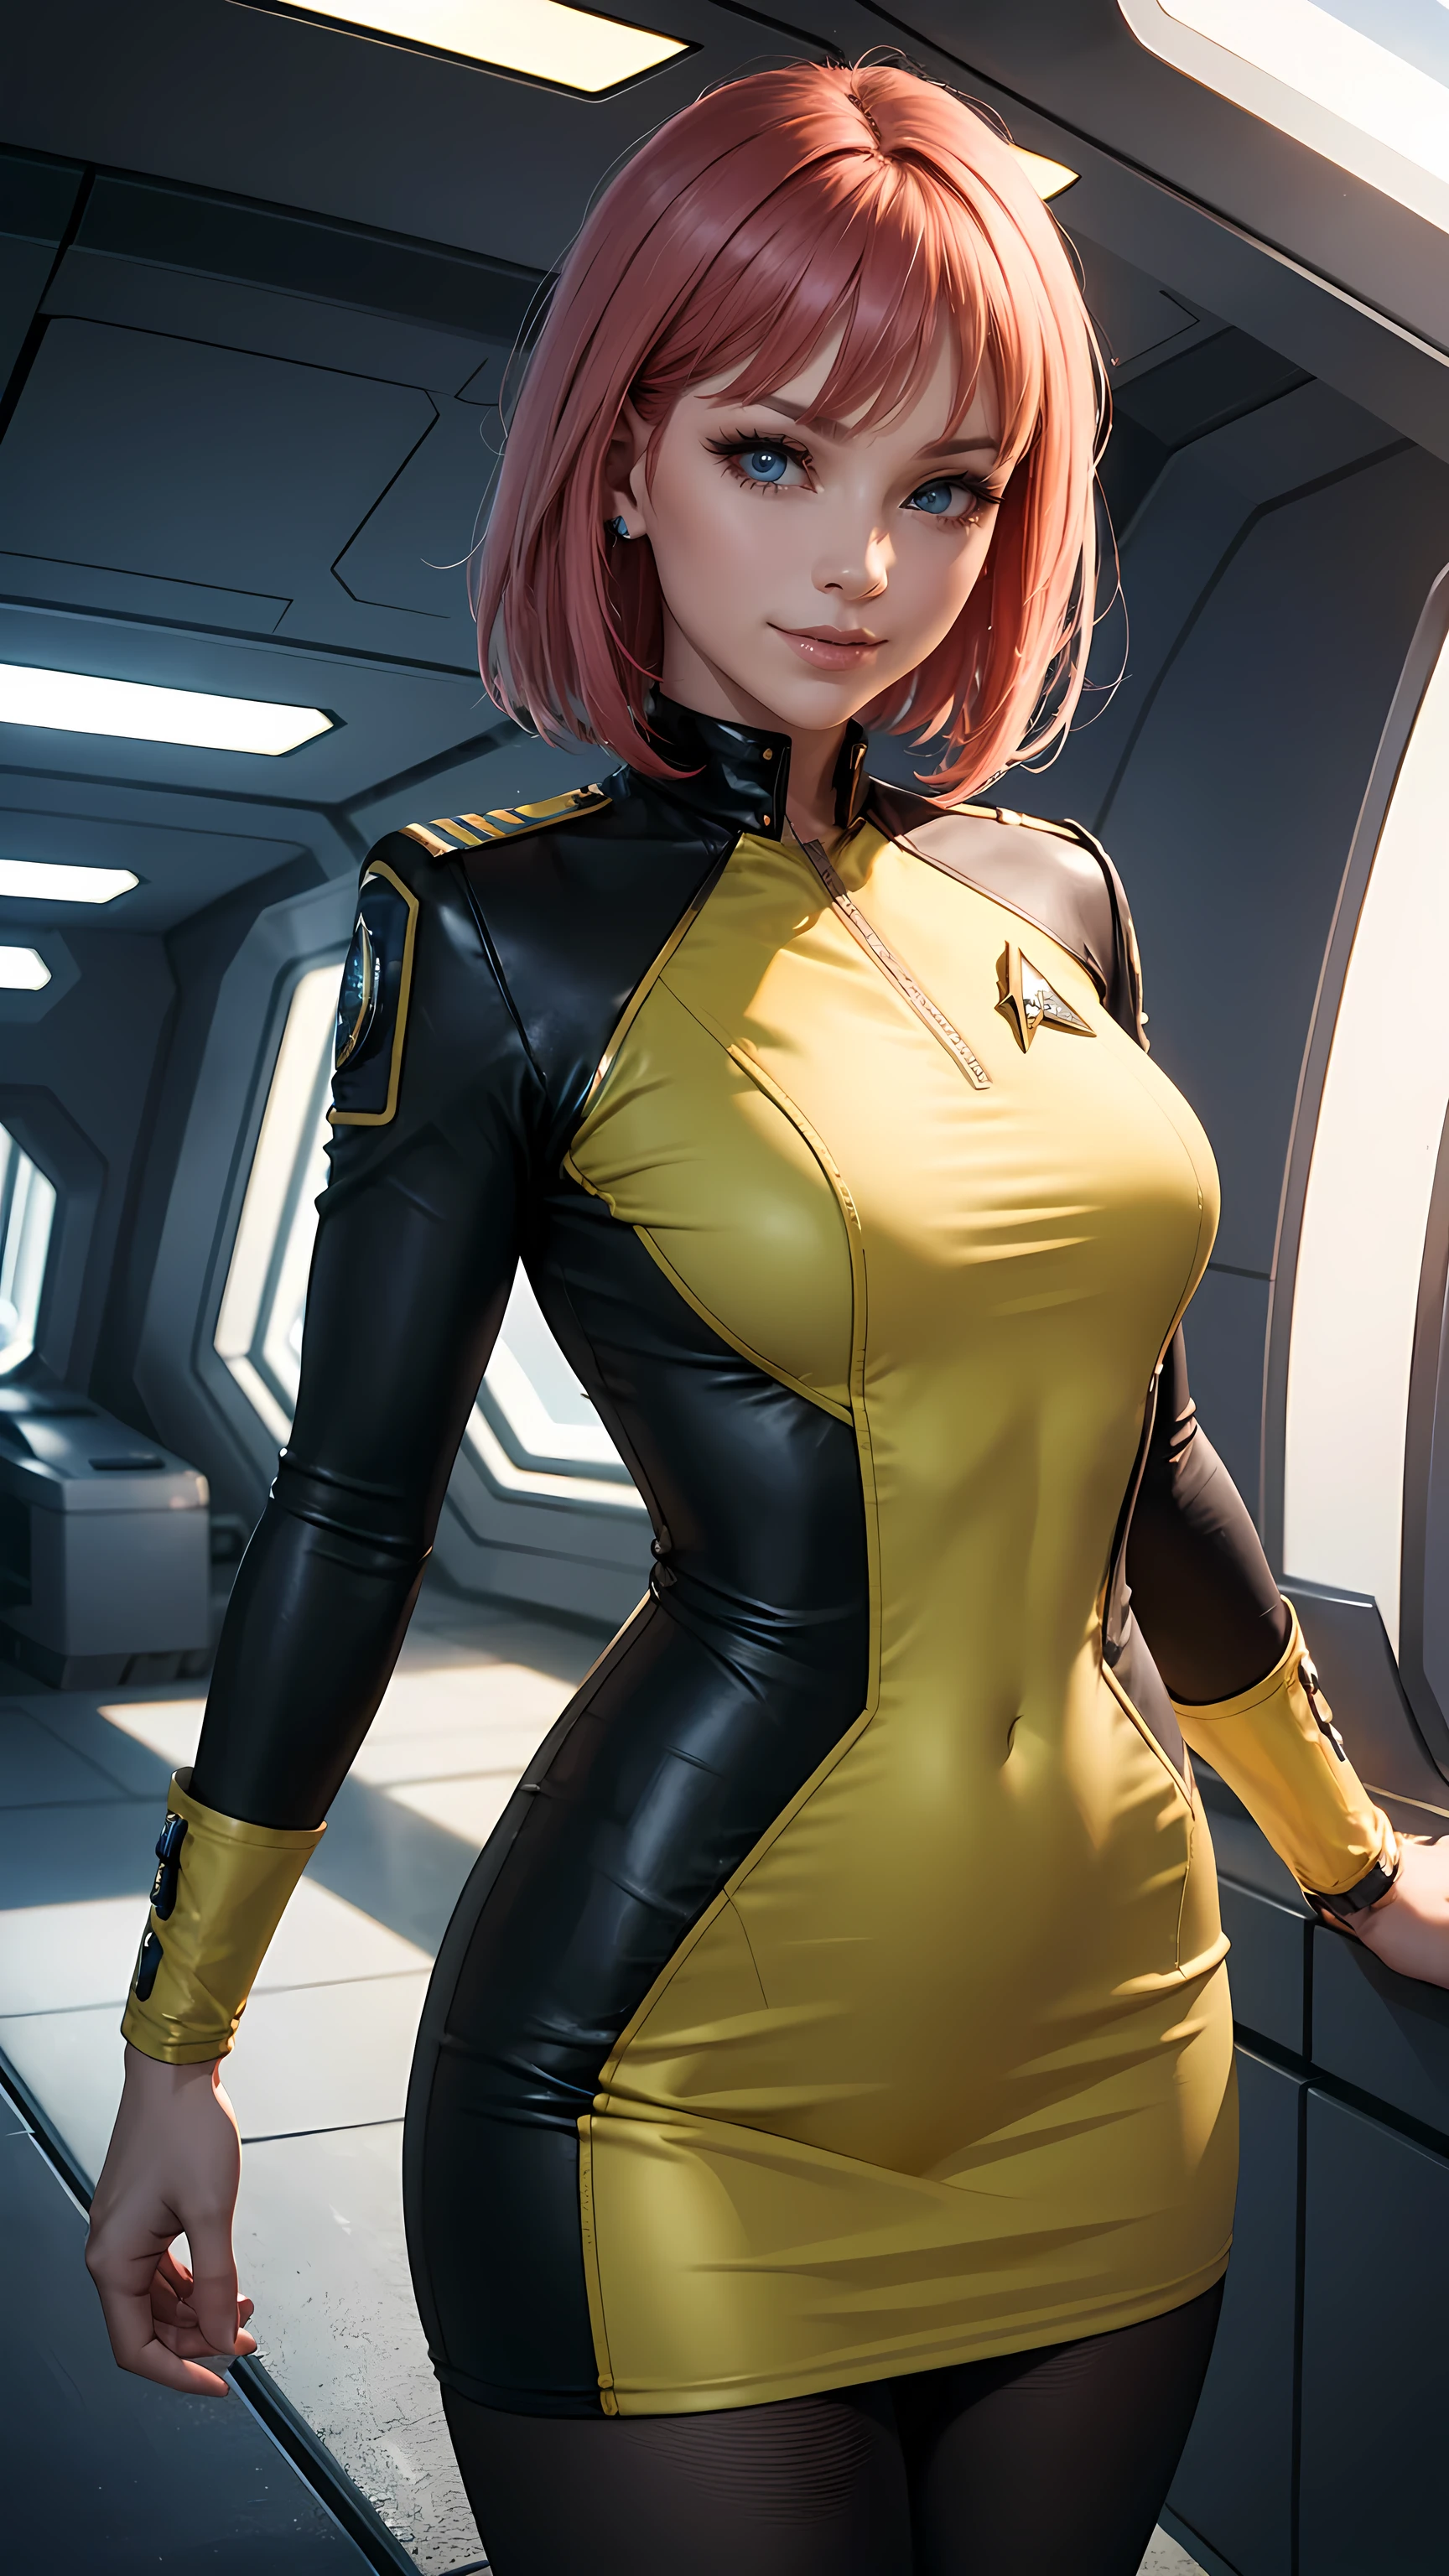 Beautiful short hair woman is shown to have a sexy figure, She is wearing classic star trek yellow uniform, jewelry, she has blue eyes, smile tease look, Girl standing on a command bridge of a starship, poseing, portrait, superior quality, many details, realistic